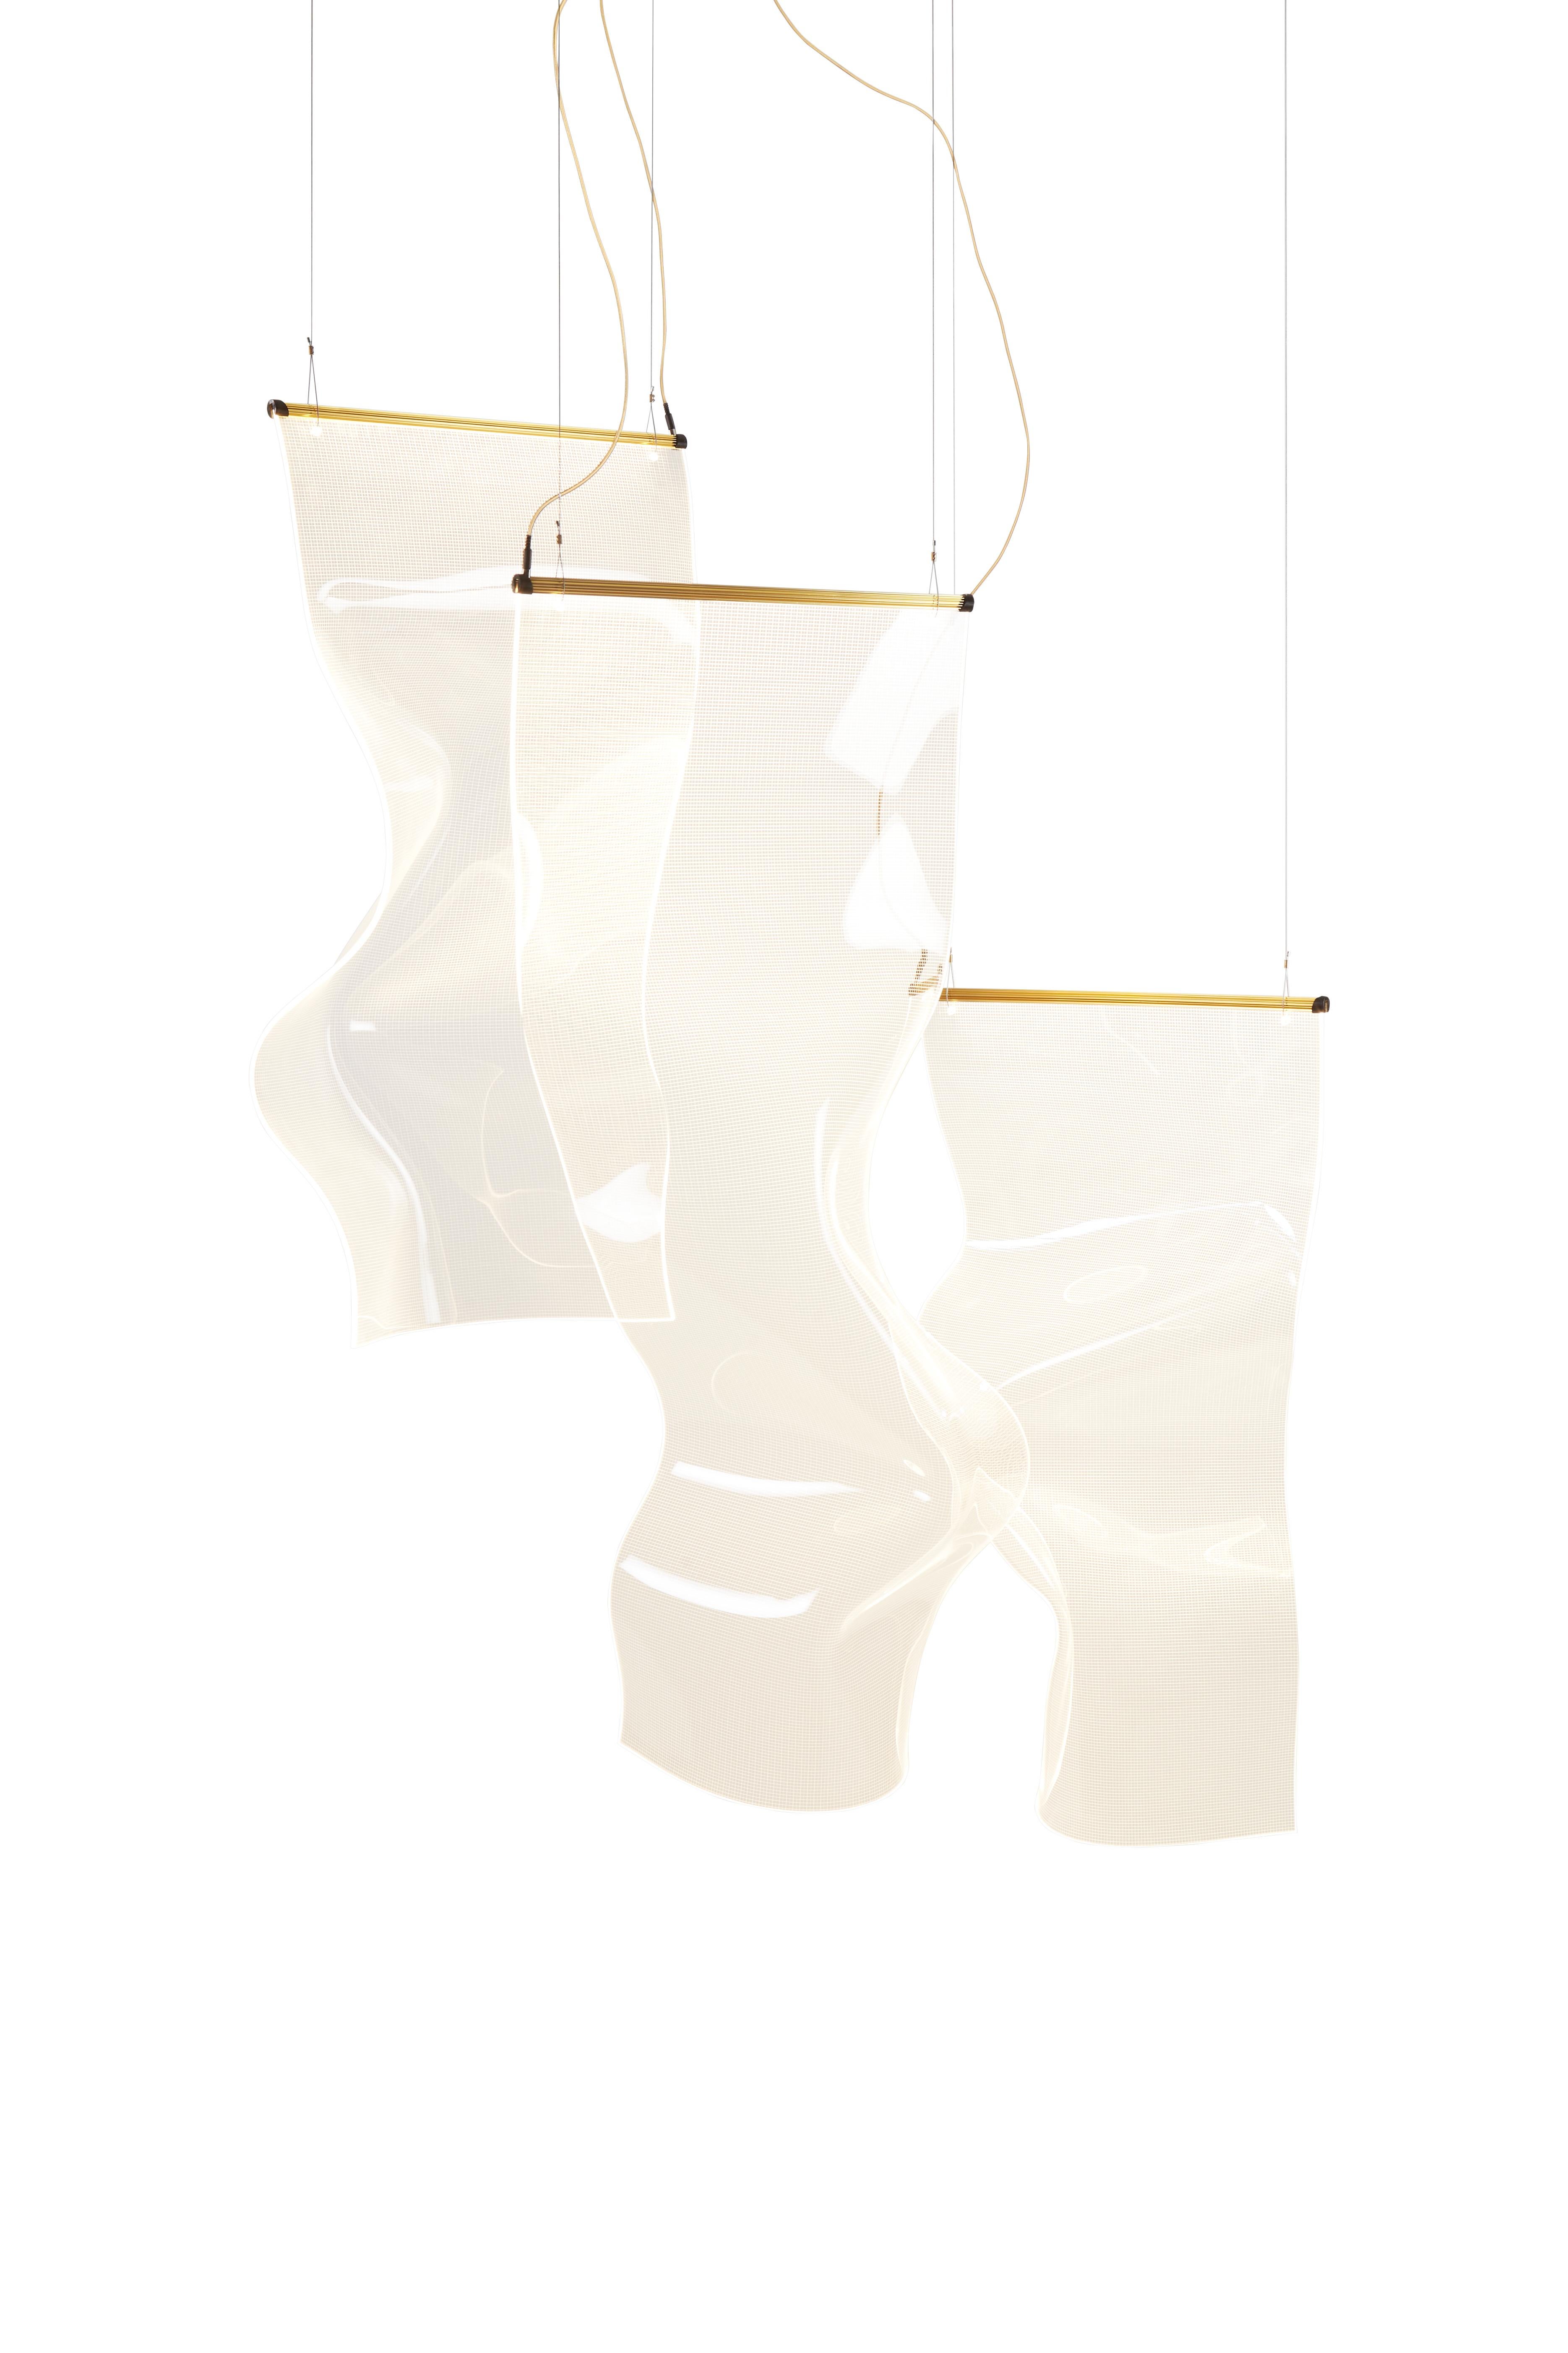 Gweilo Zhou H PE by Partisans


It’s name means ghost in chinese. Makes sense when you look at it, right? Made from hand-molded acrylic.
Suspension lamp. Hand-moulded, transparent acrylic structure. Led strip embedded in the gold or silver anodised